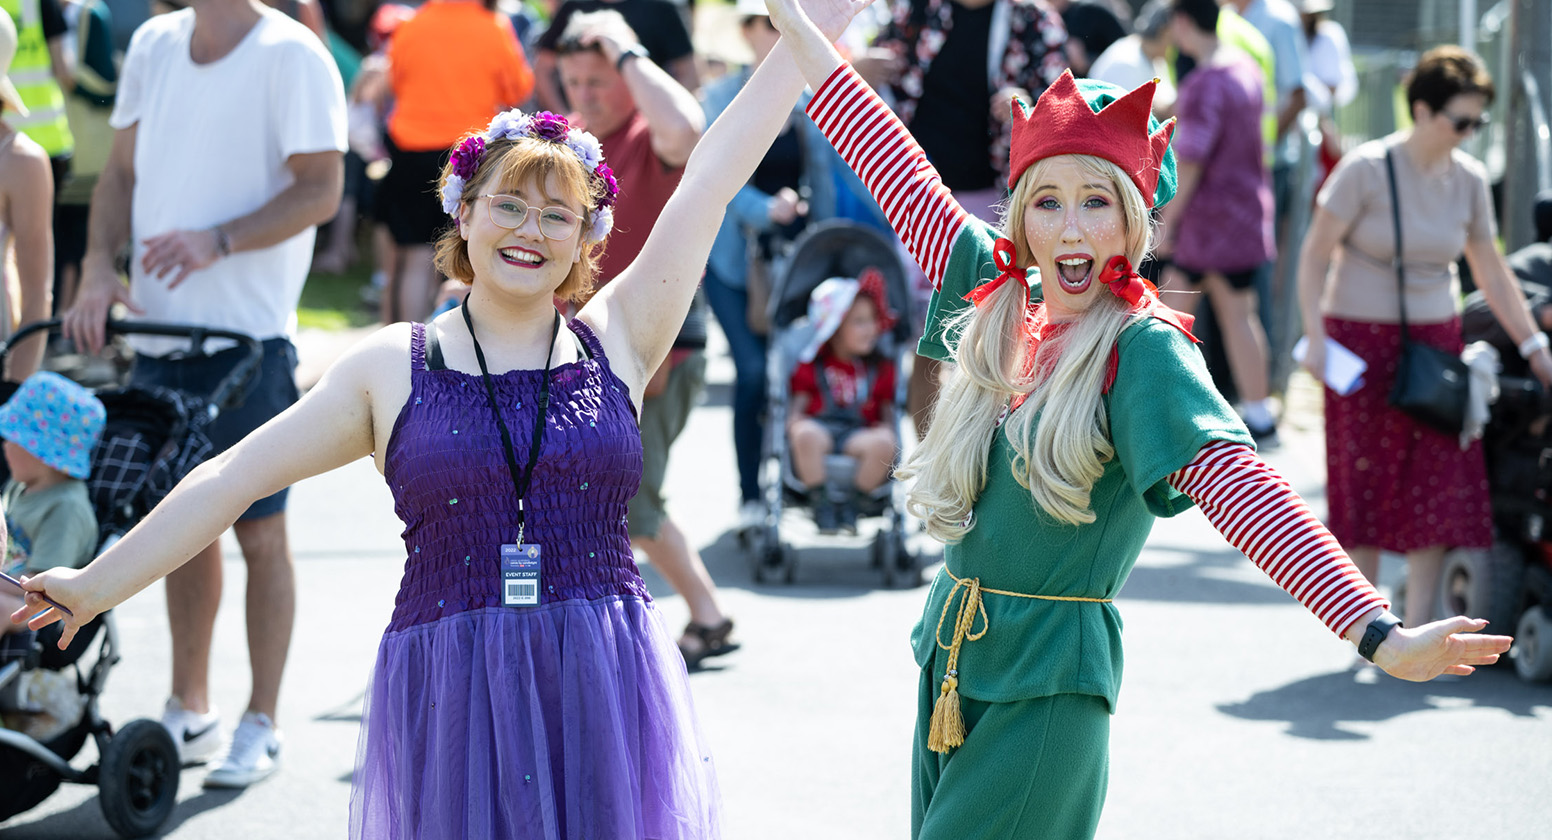 Two ladies, one dressed as an elf, have their hands up and smiling amongst a crowd